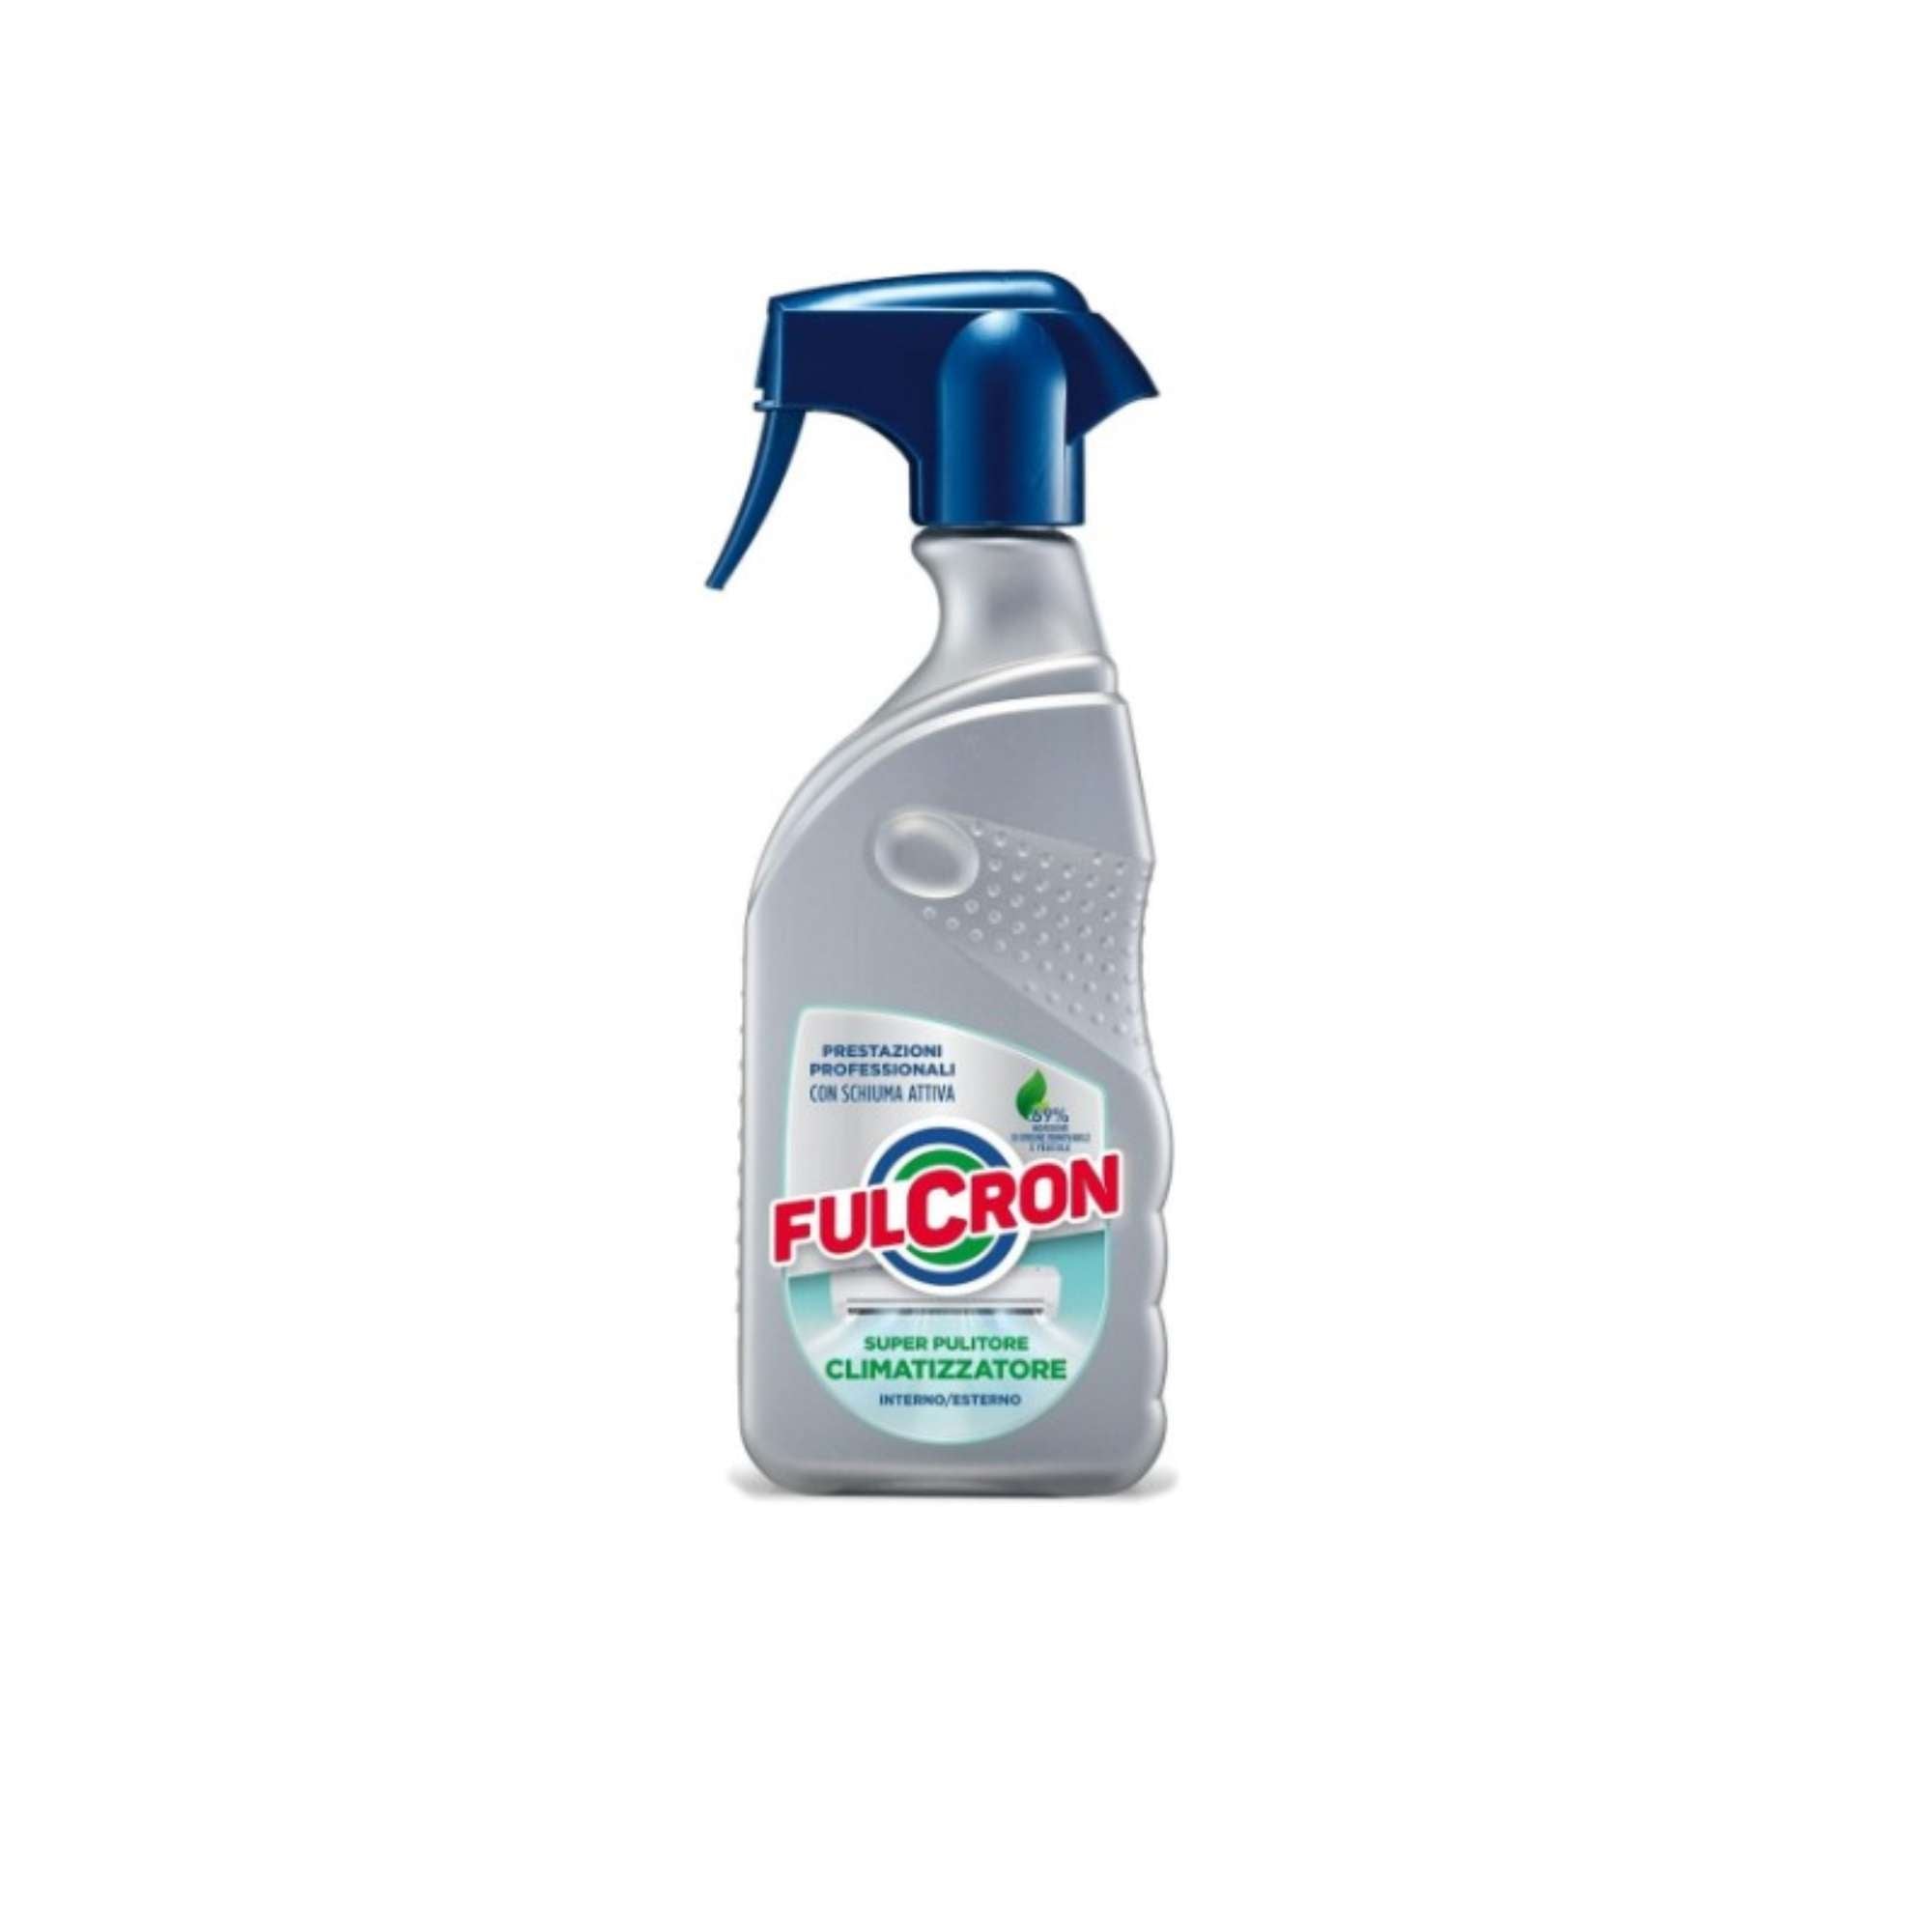 Fulcron Air Conditioner Cleaner Active Foam 500ml - Arexons 2567